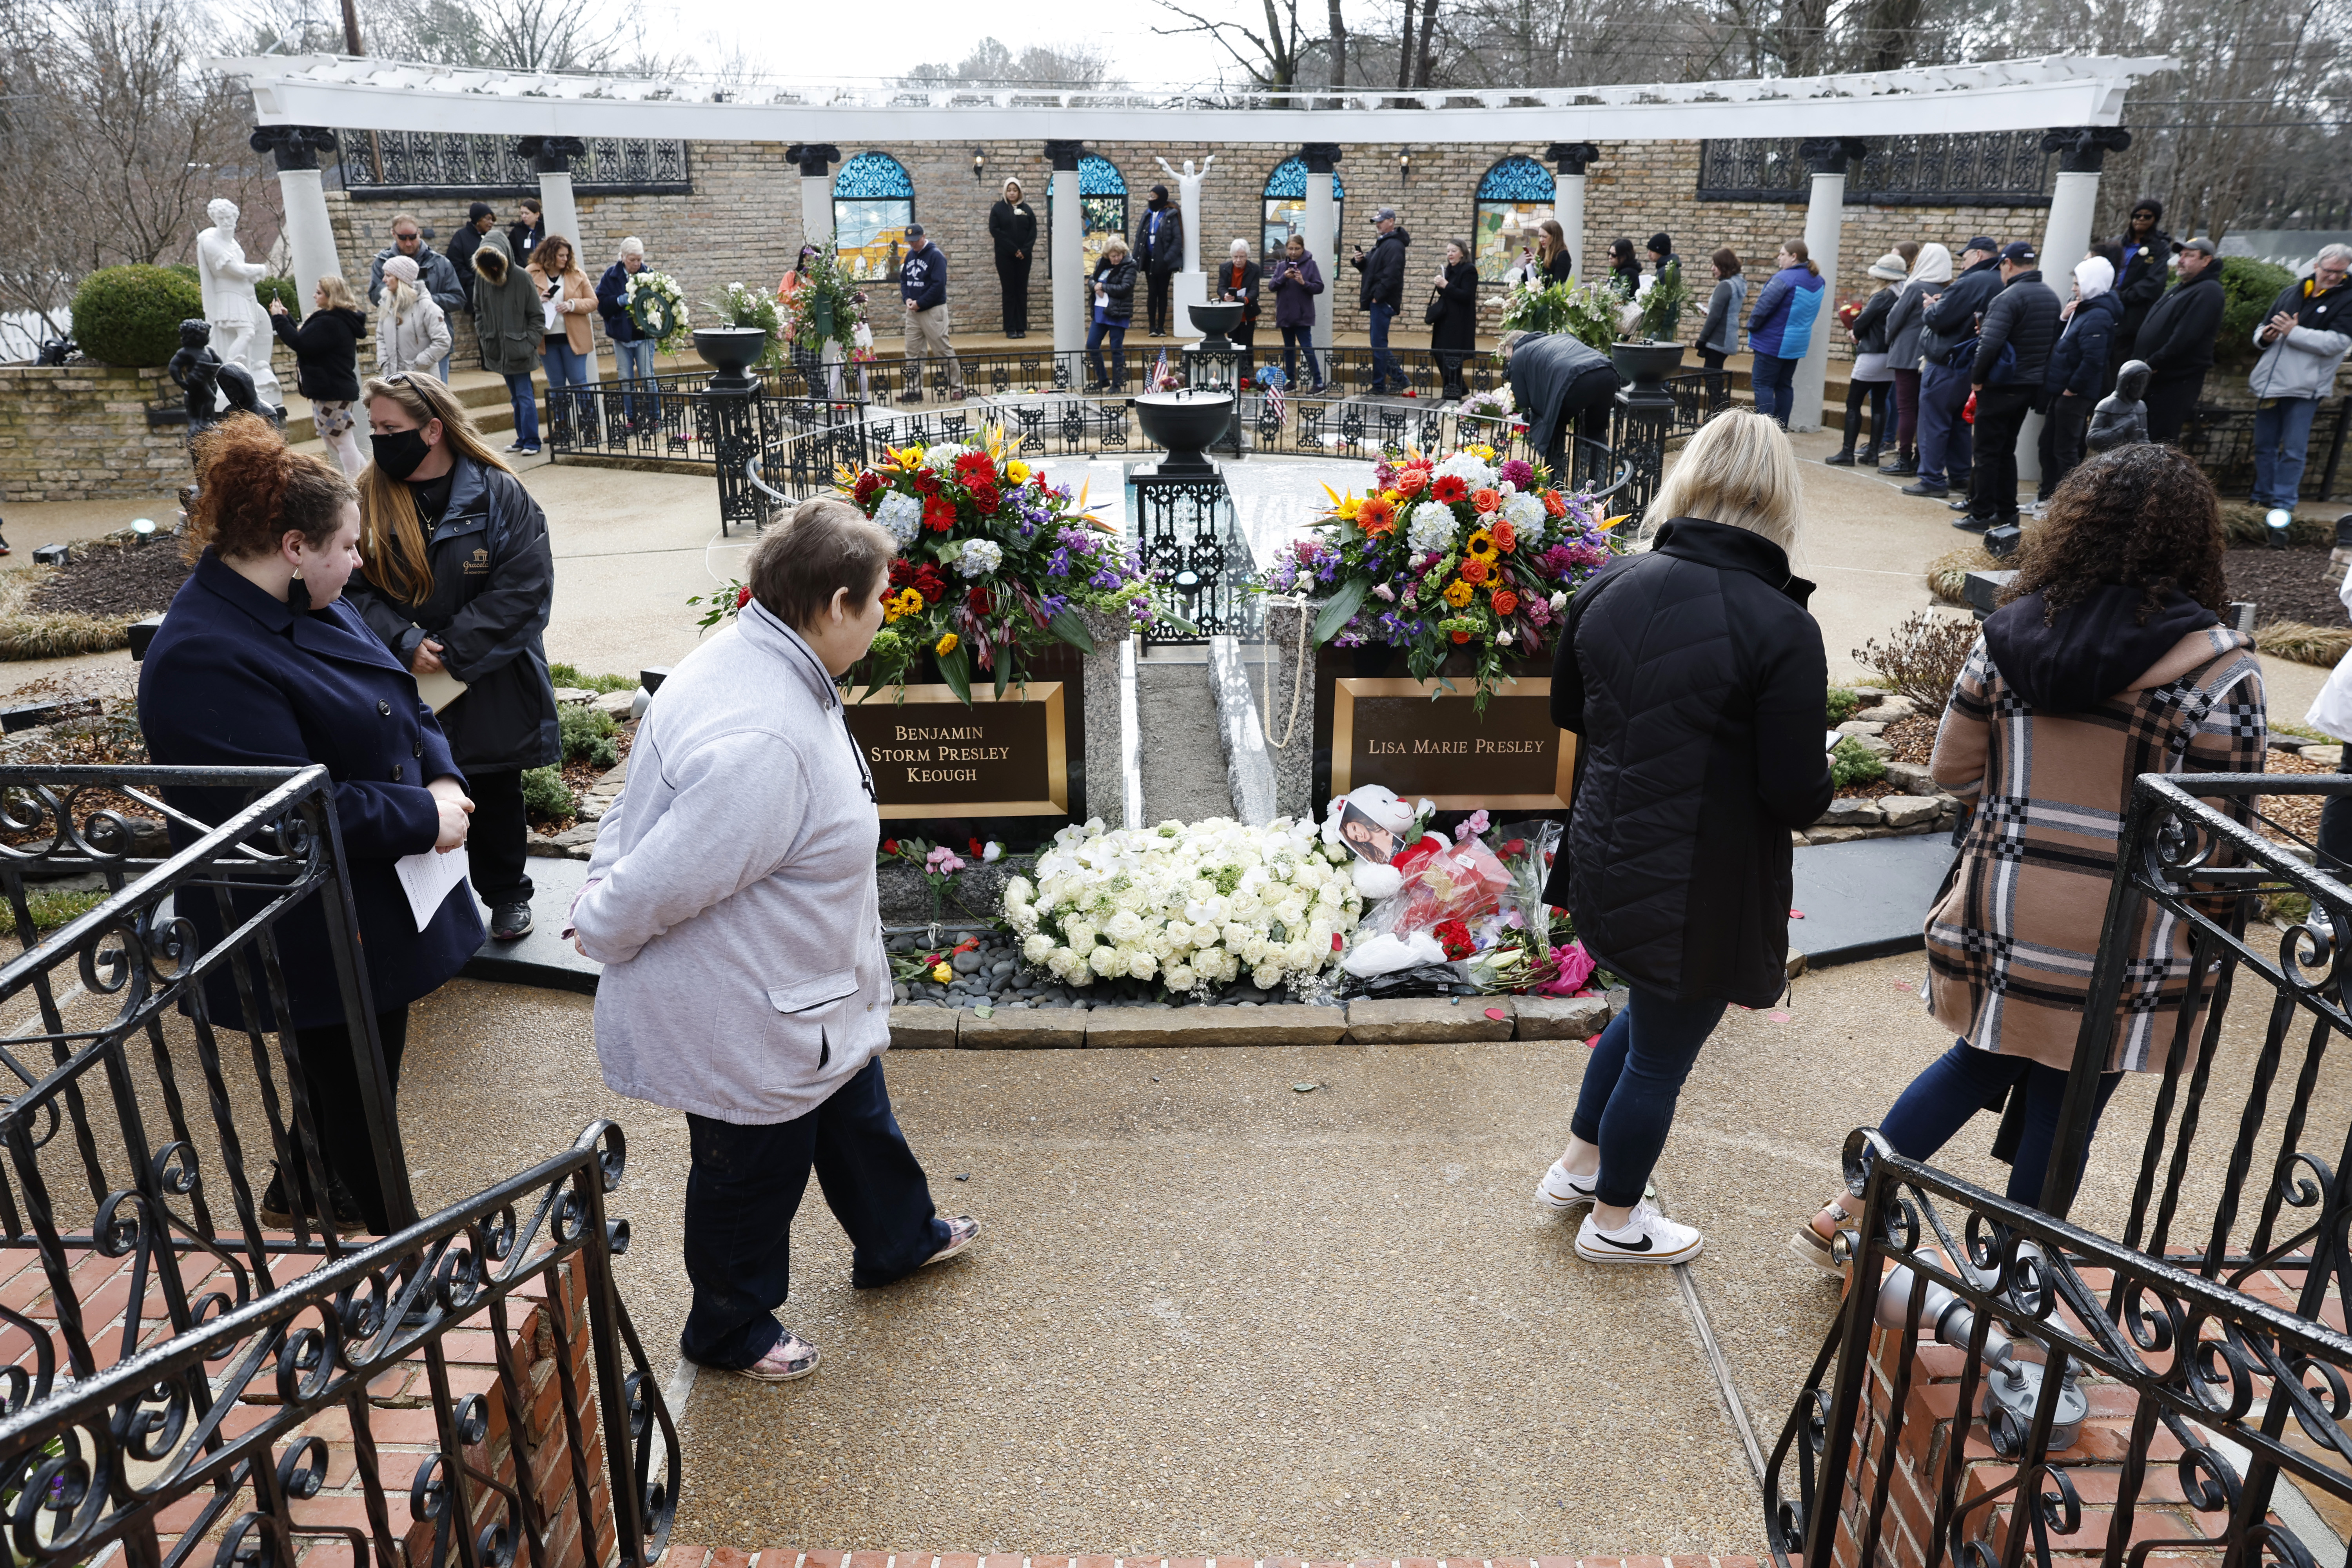 MEMPHIS, TENNESSEE - JANUARY 22: Fans visit the grave of Lisa Marie Presley during her memorial on January 22, 2023 in Memphis, Tennessee. Presley, 54, the only child of American singer Elvis Presley, died January 12, 2023 in Los Angeles. (Photo by Jason Kempin/Getty Images)